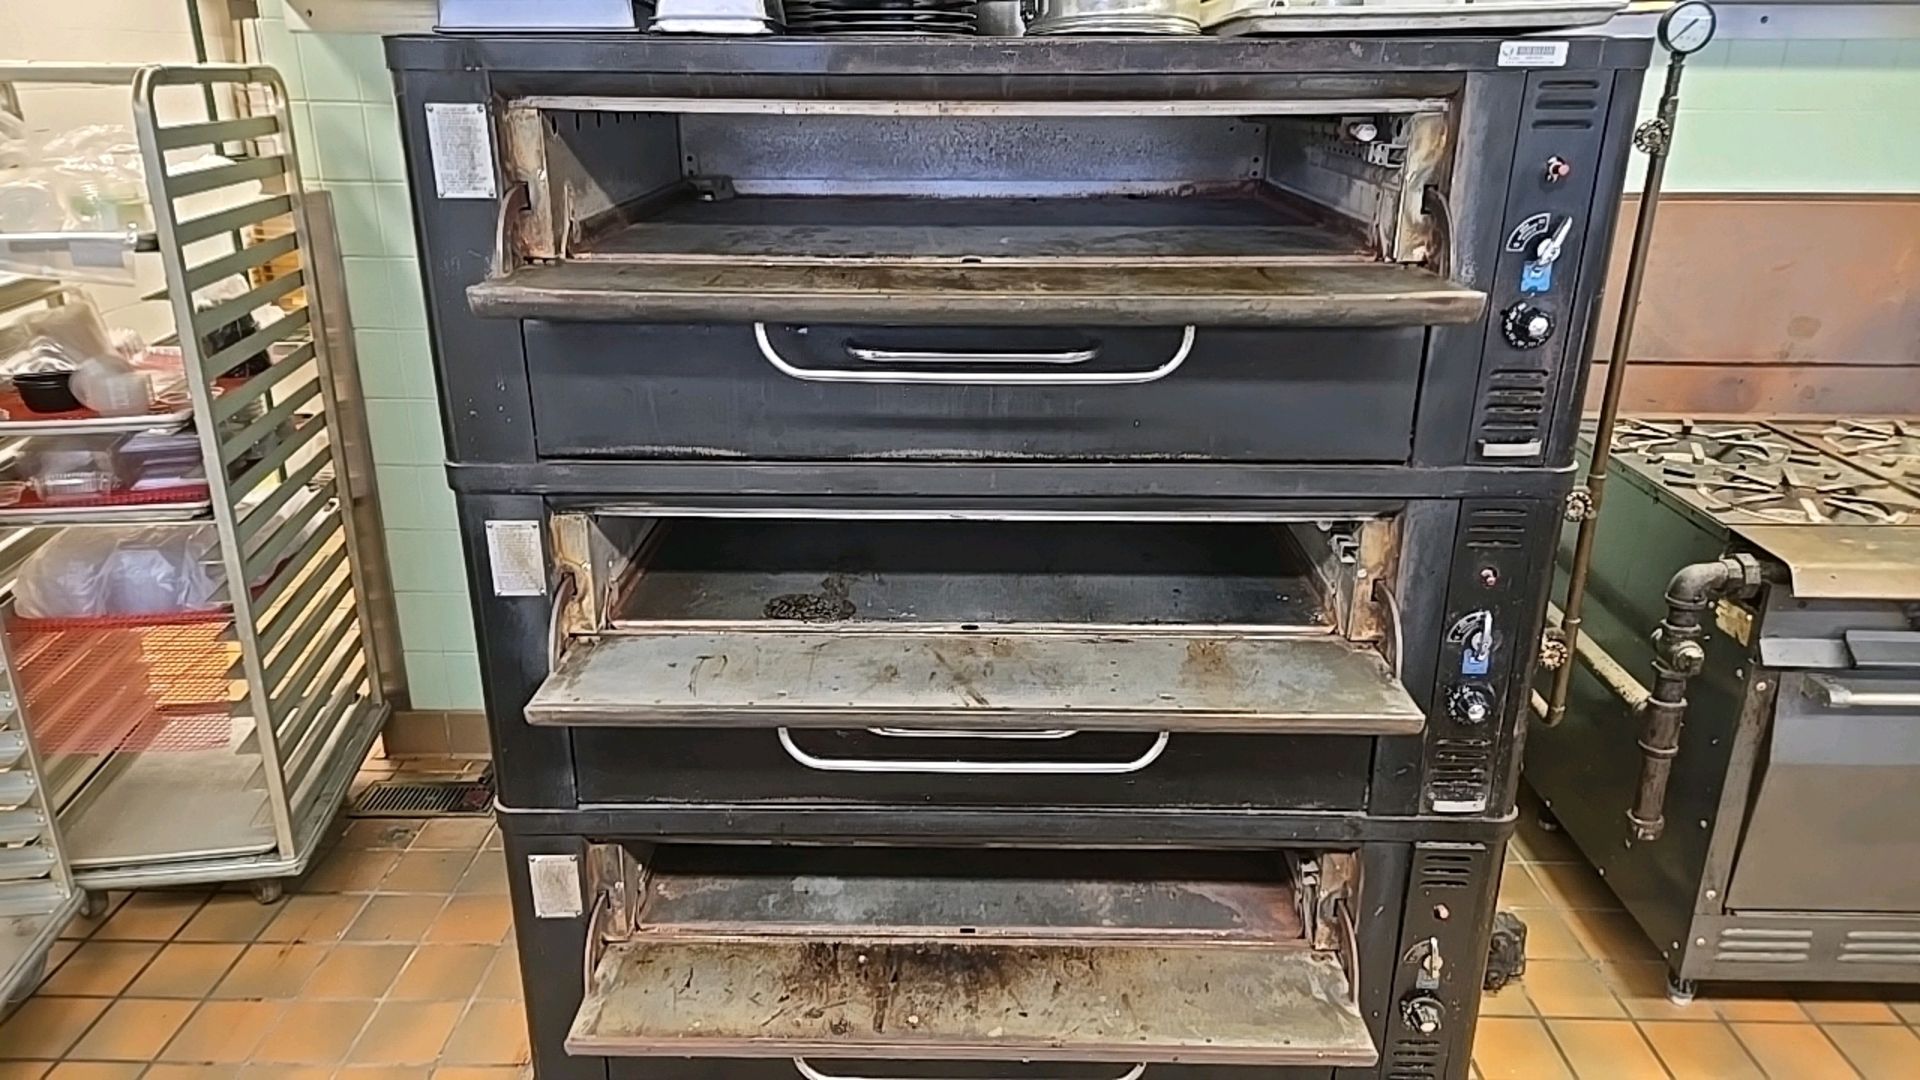 BLODGETT TRIPLE STACK DECK OVEN - Image 2 of 6